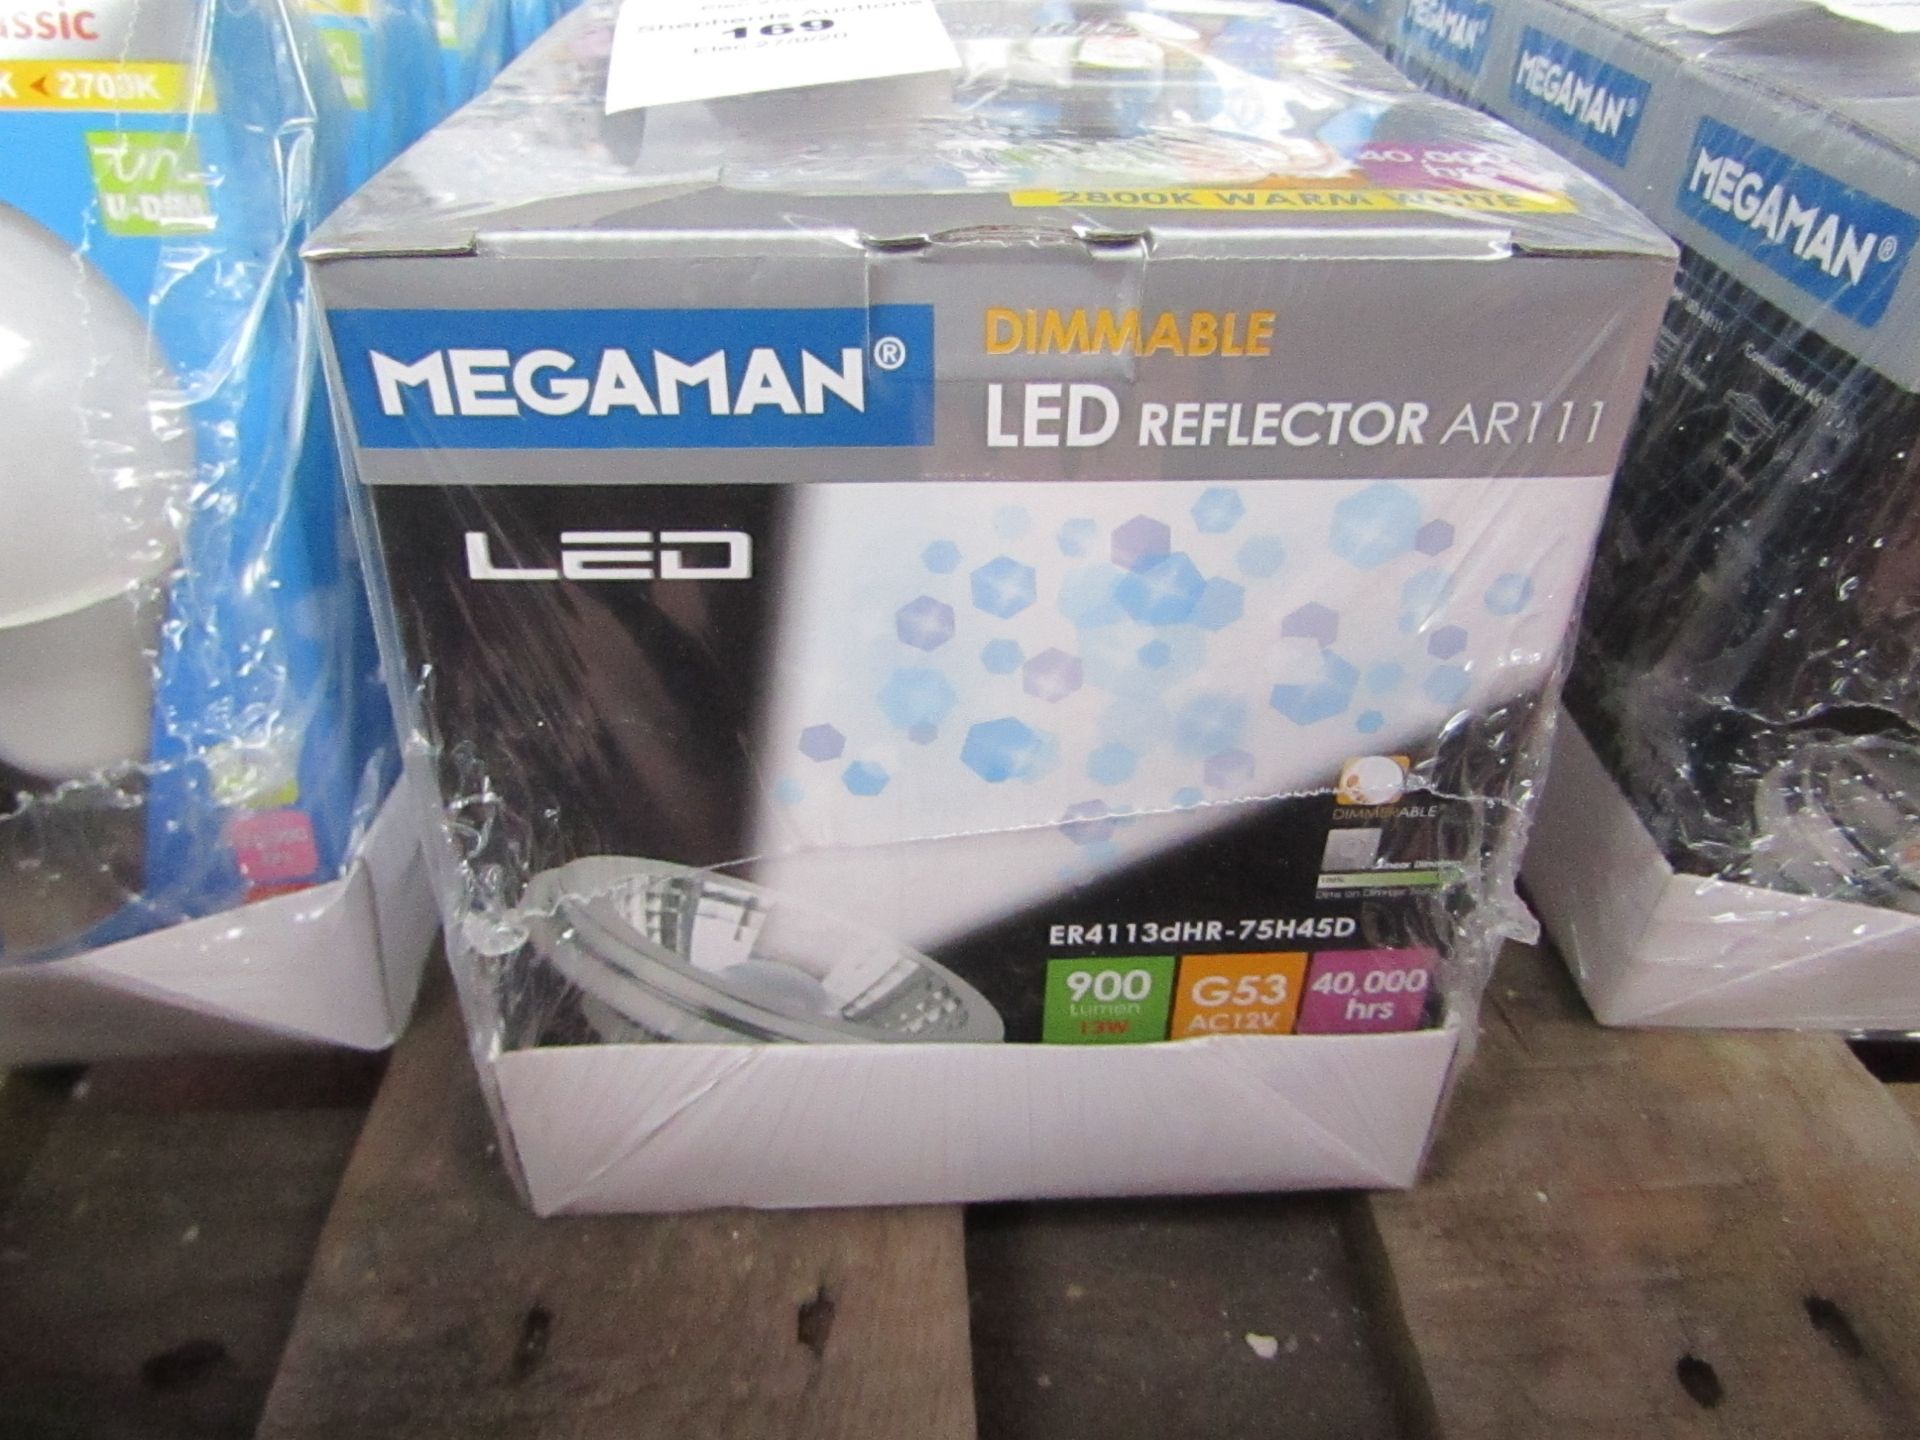 1x Megaman LED reflector bulb, new and boxed. 40,000Hrs / G53 / 900 Lumens